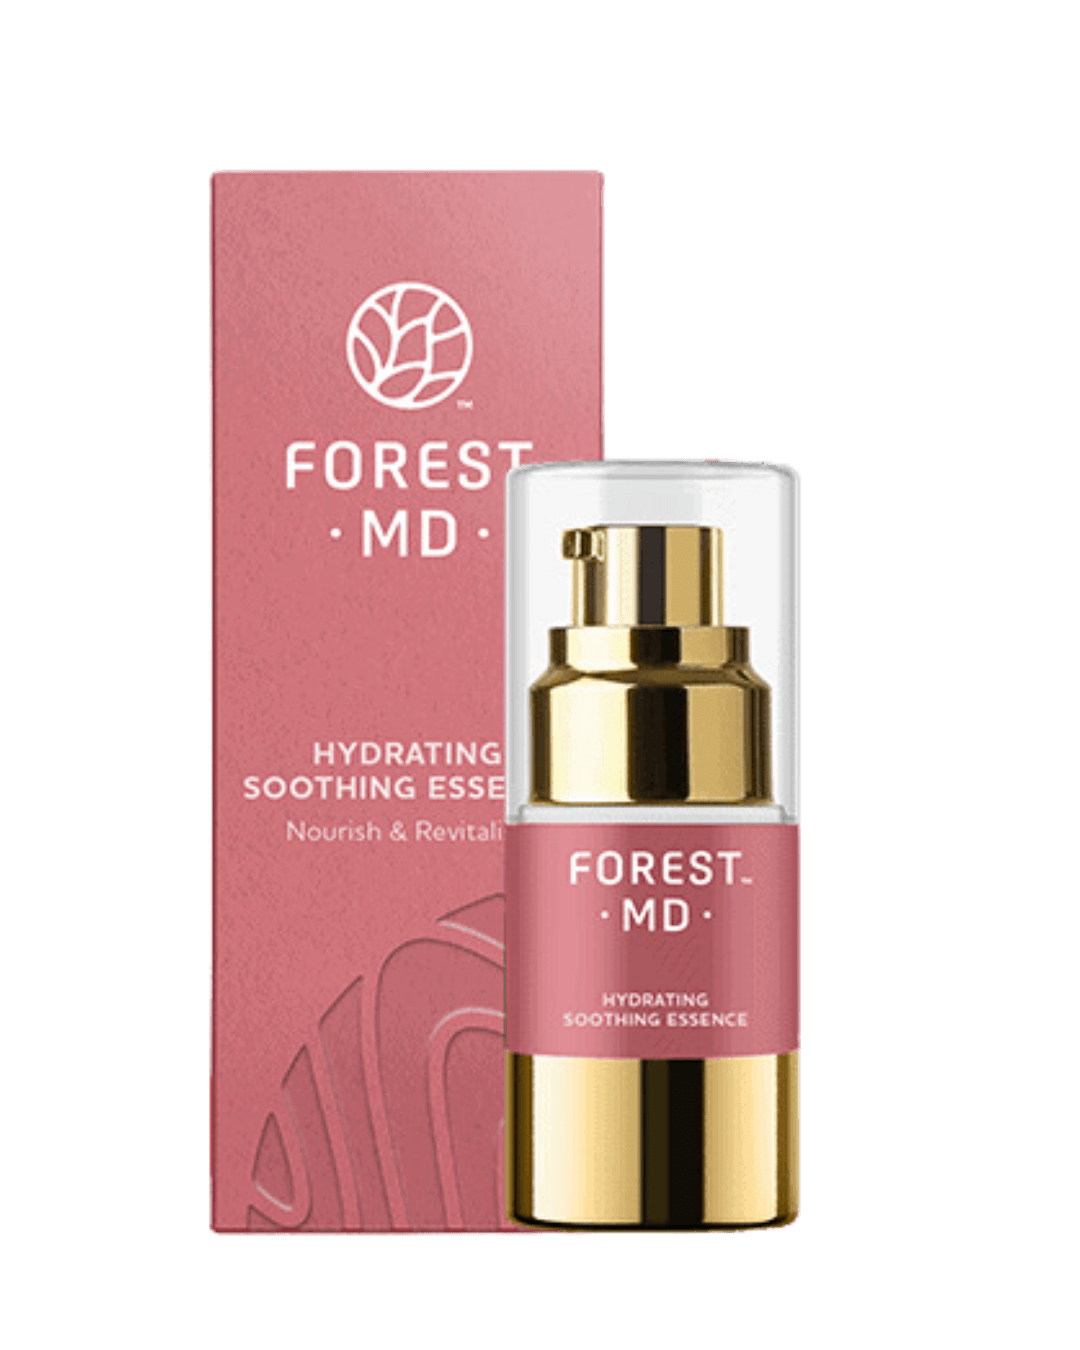 Daily Vanity Beauty Awards 2024 Best Skincare FOREST MD Hydrating Soothing Essence Voted By Beauty Experts